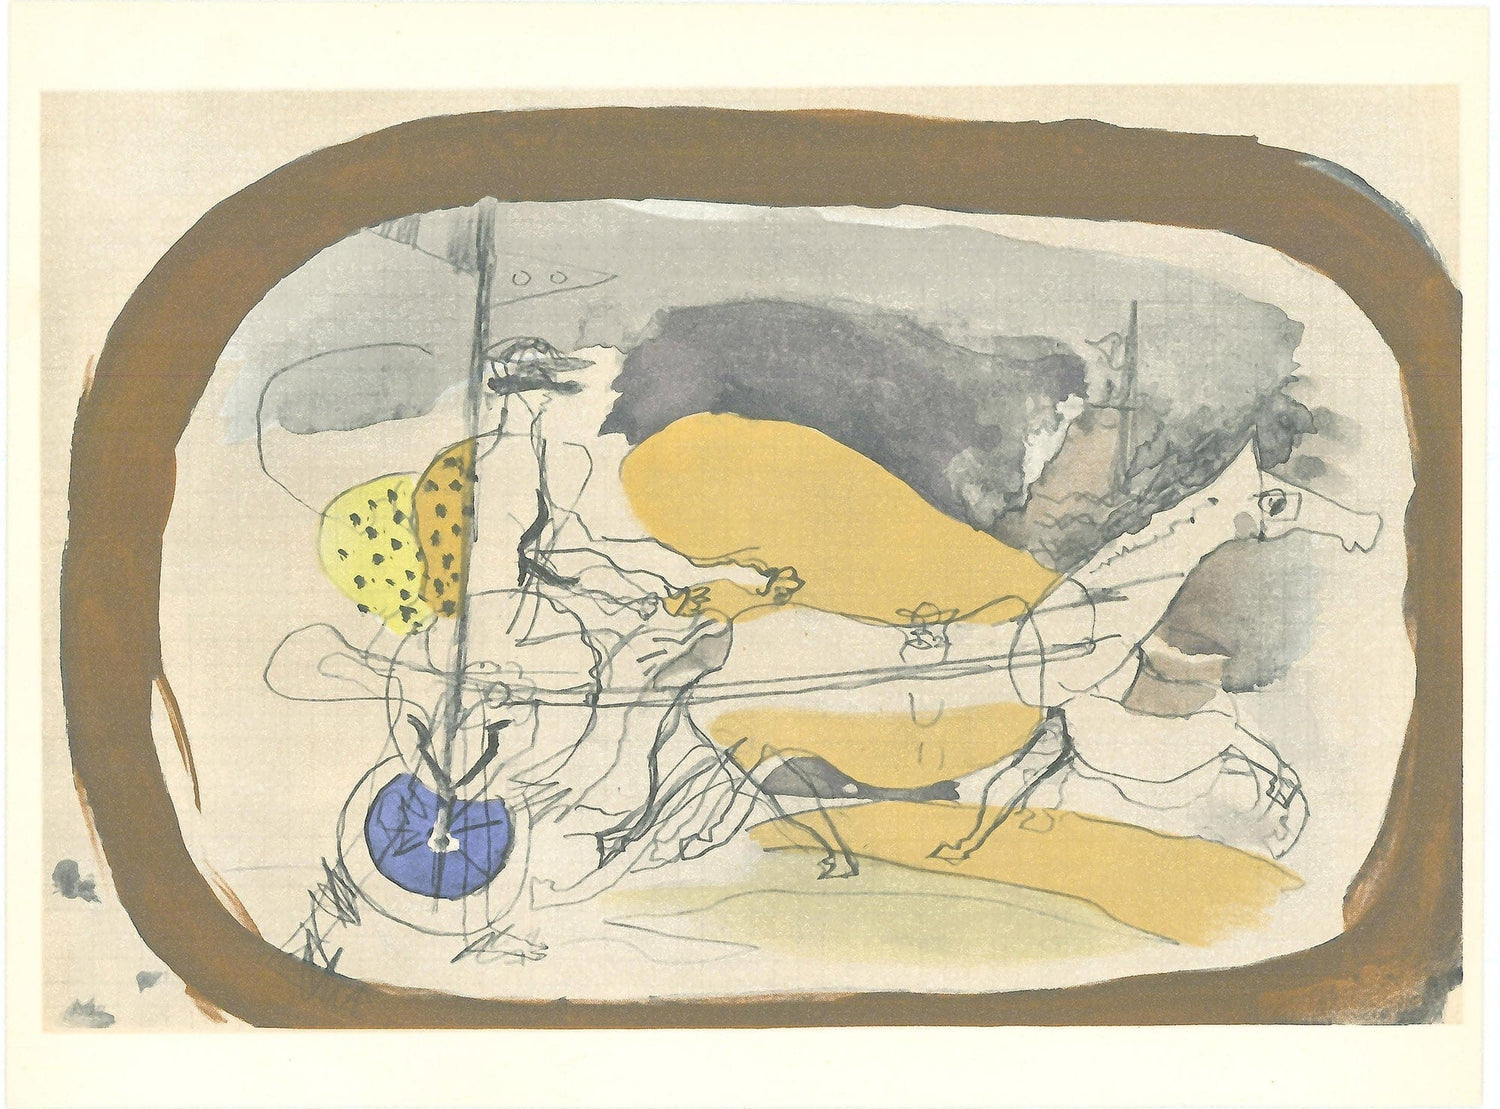 Georges Braque, "Untitled III " ZOOM Vol. 8 No. 31 ET 32 verve lithograph